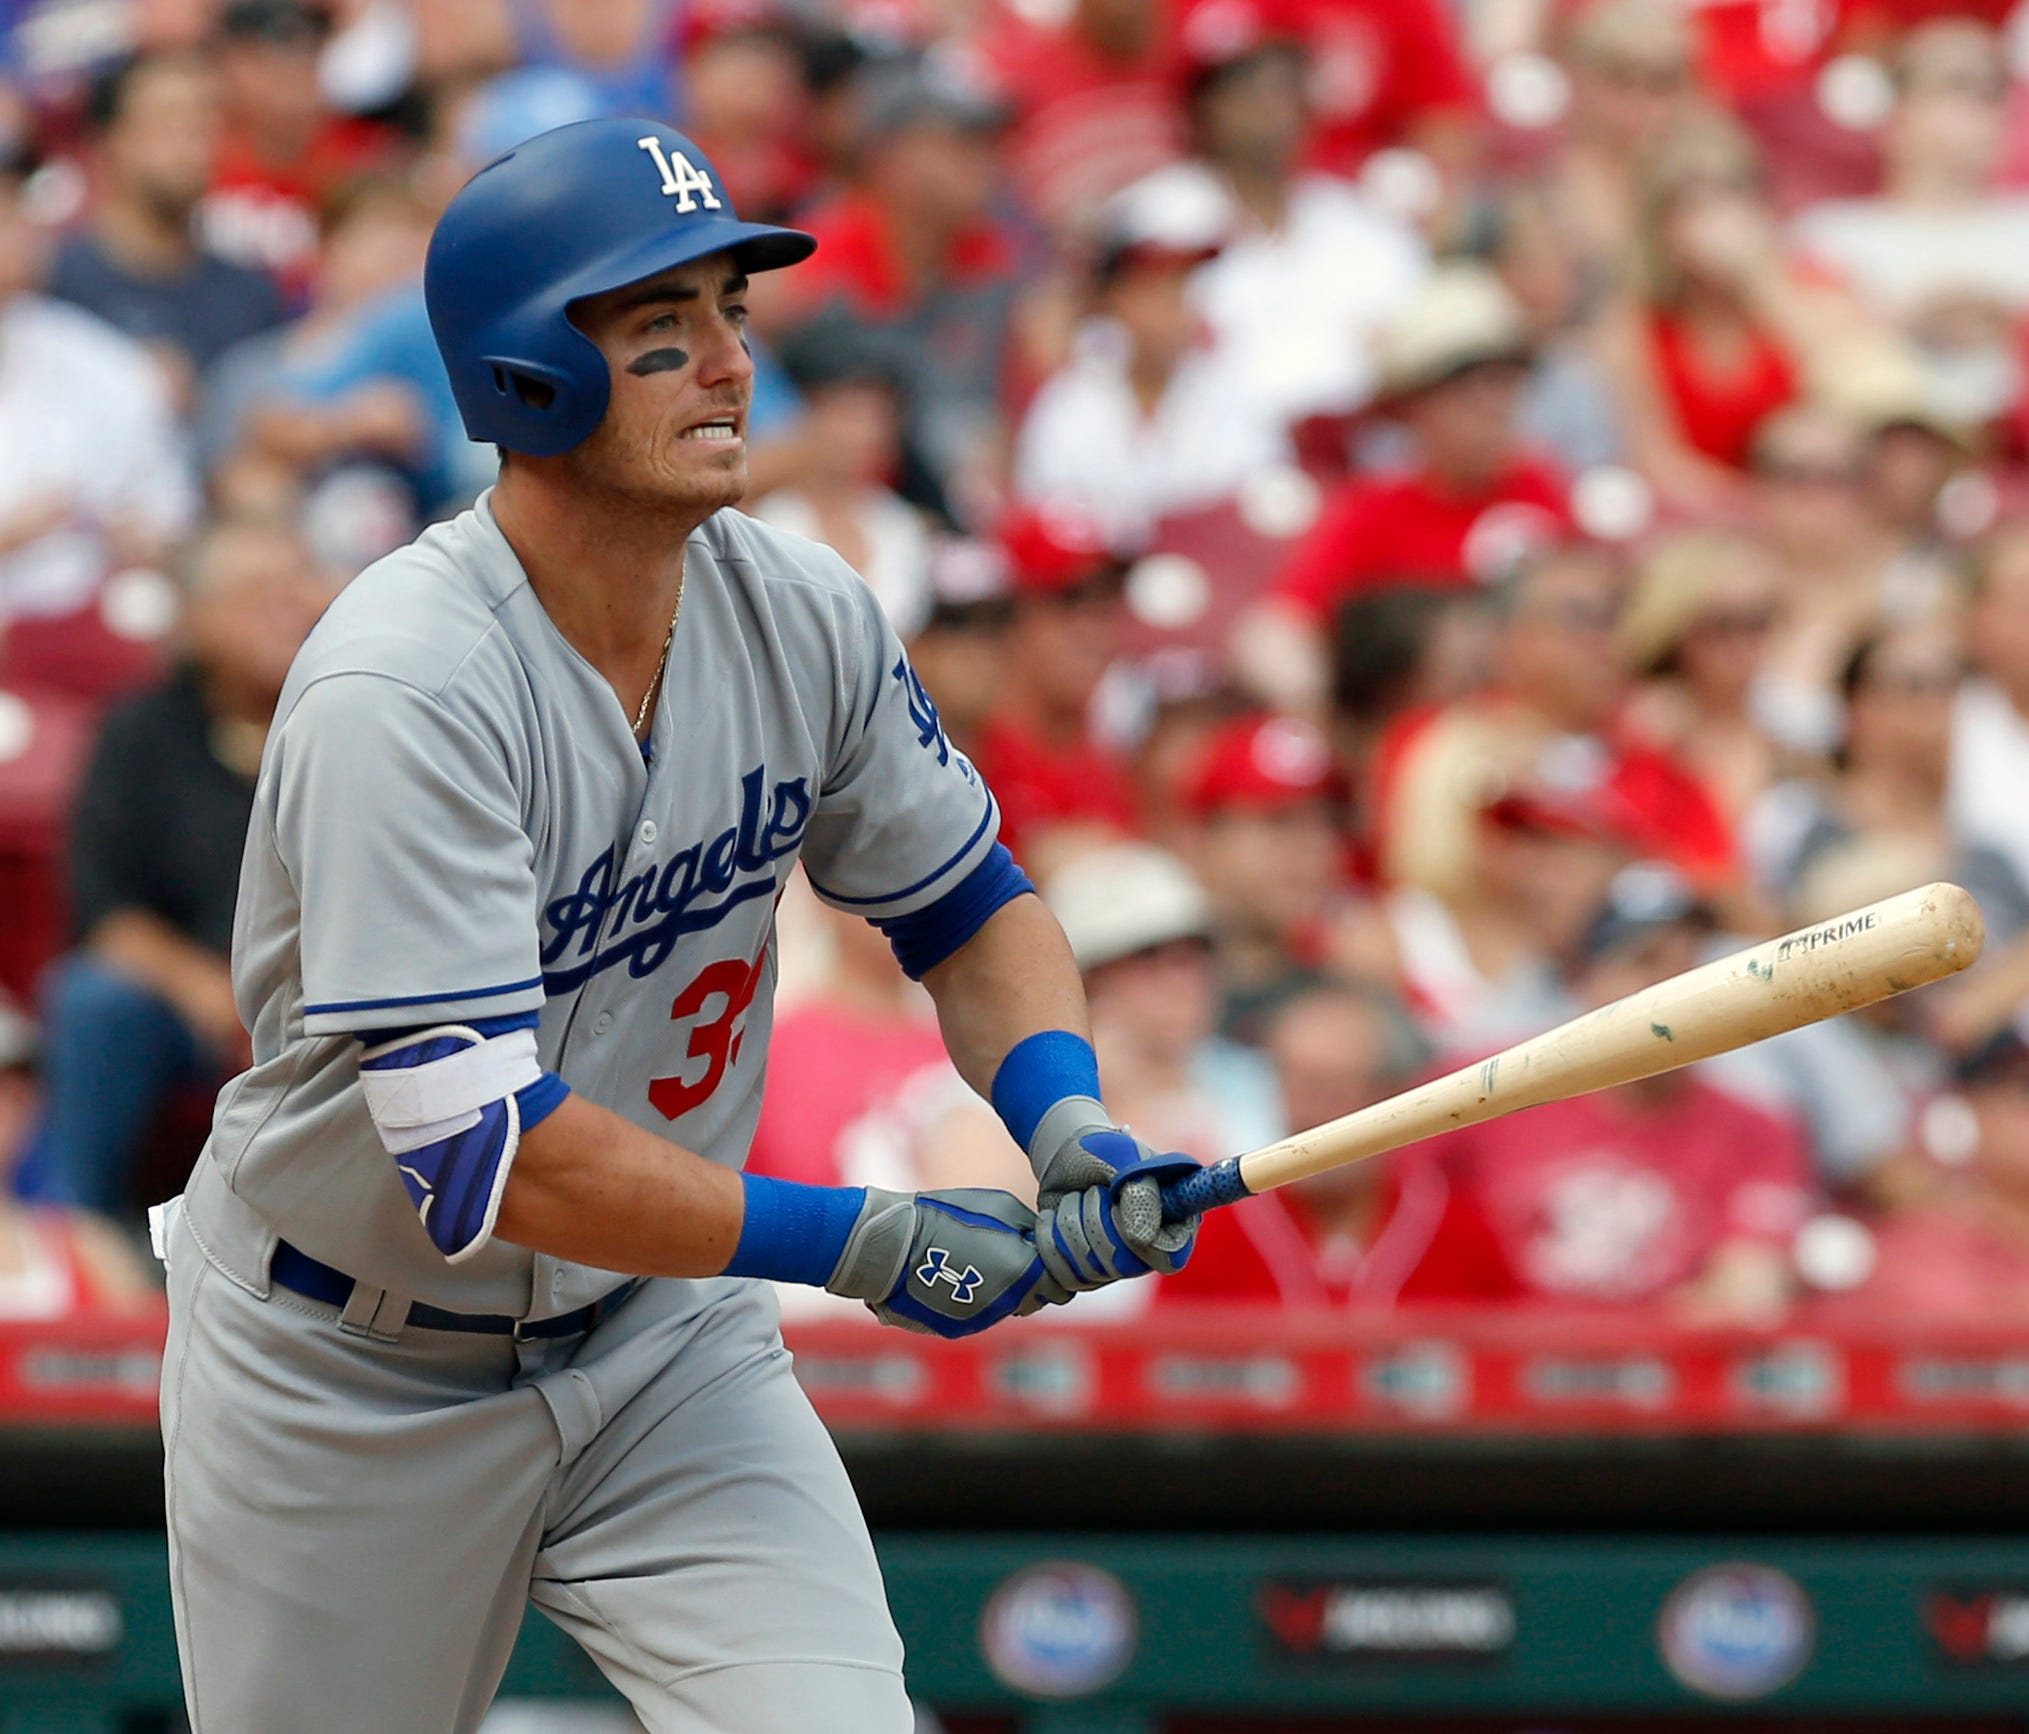 Cody Bellinger leads the NL with 20 home runs despite an April 25 debut.